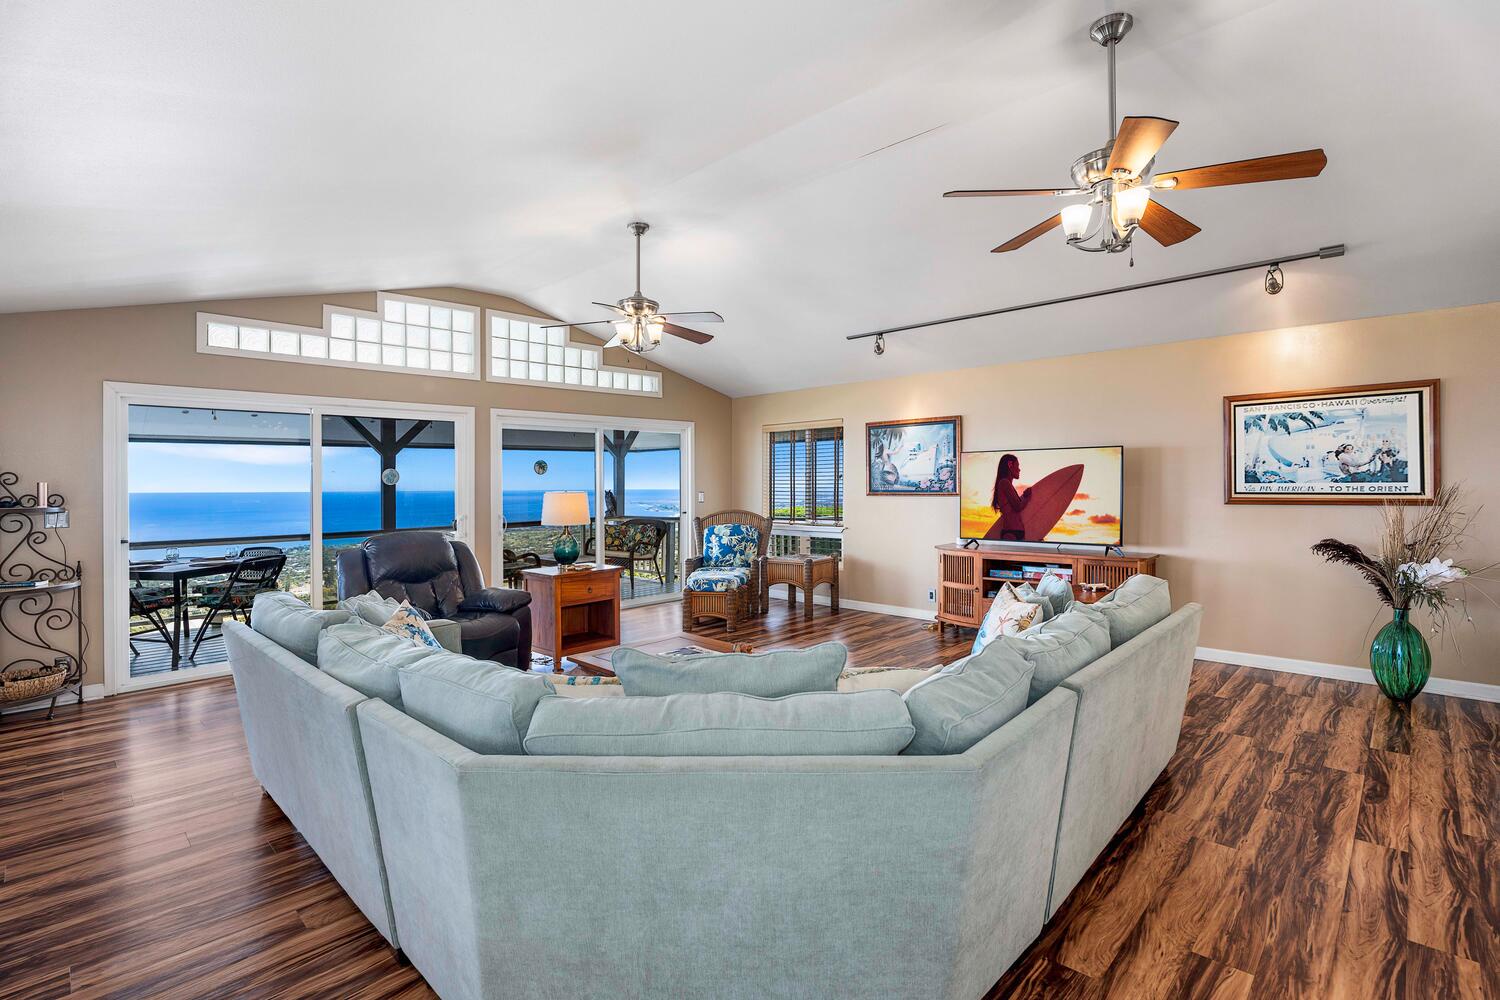 Kailua Kona Vacation Rentals, Honu O Kai (Turtle of the Sea) - Lounge in the living room with views towards the ocean.